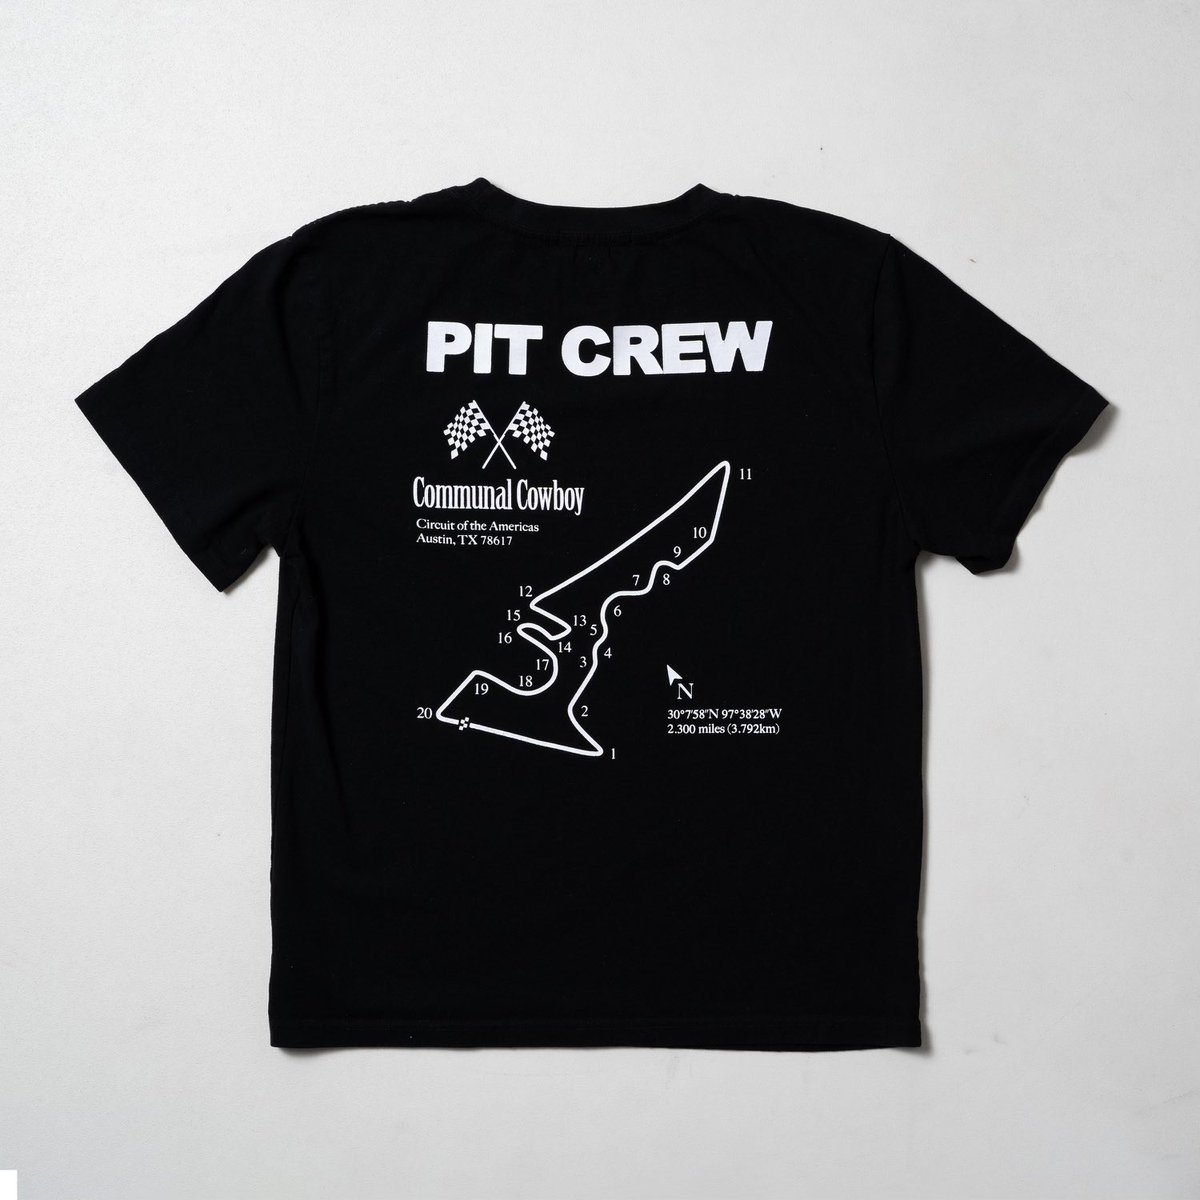 The Pit Crew collection is officially live. Celebrating 5 years of Communal Cowboy, and 5 years of living fast 🏁